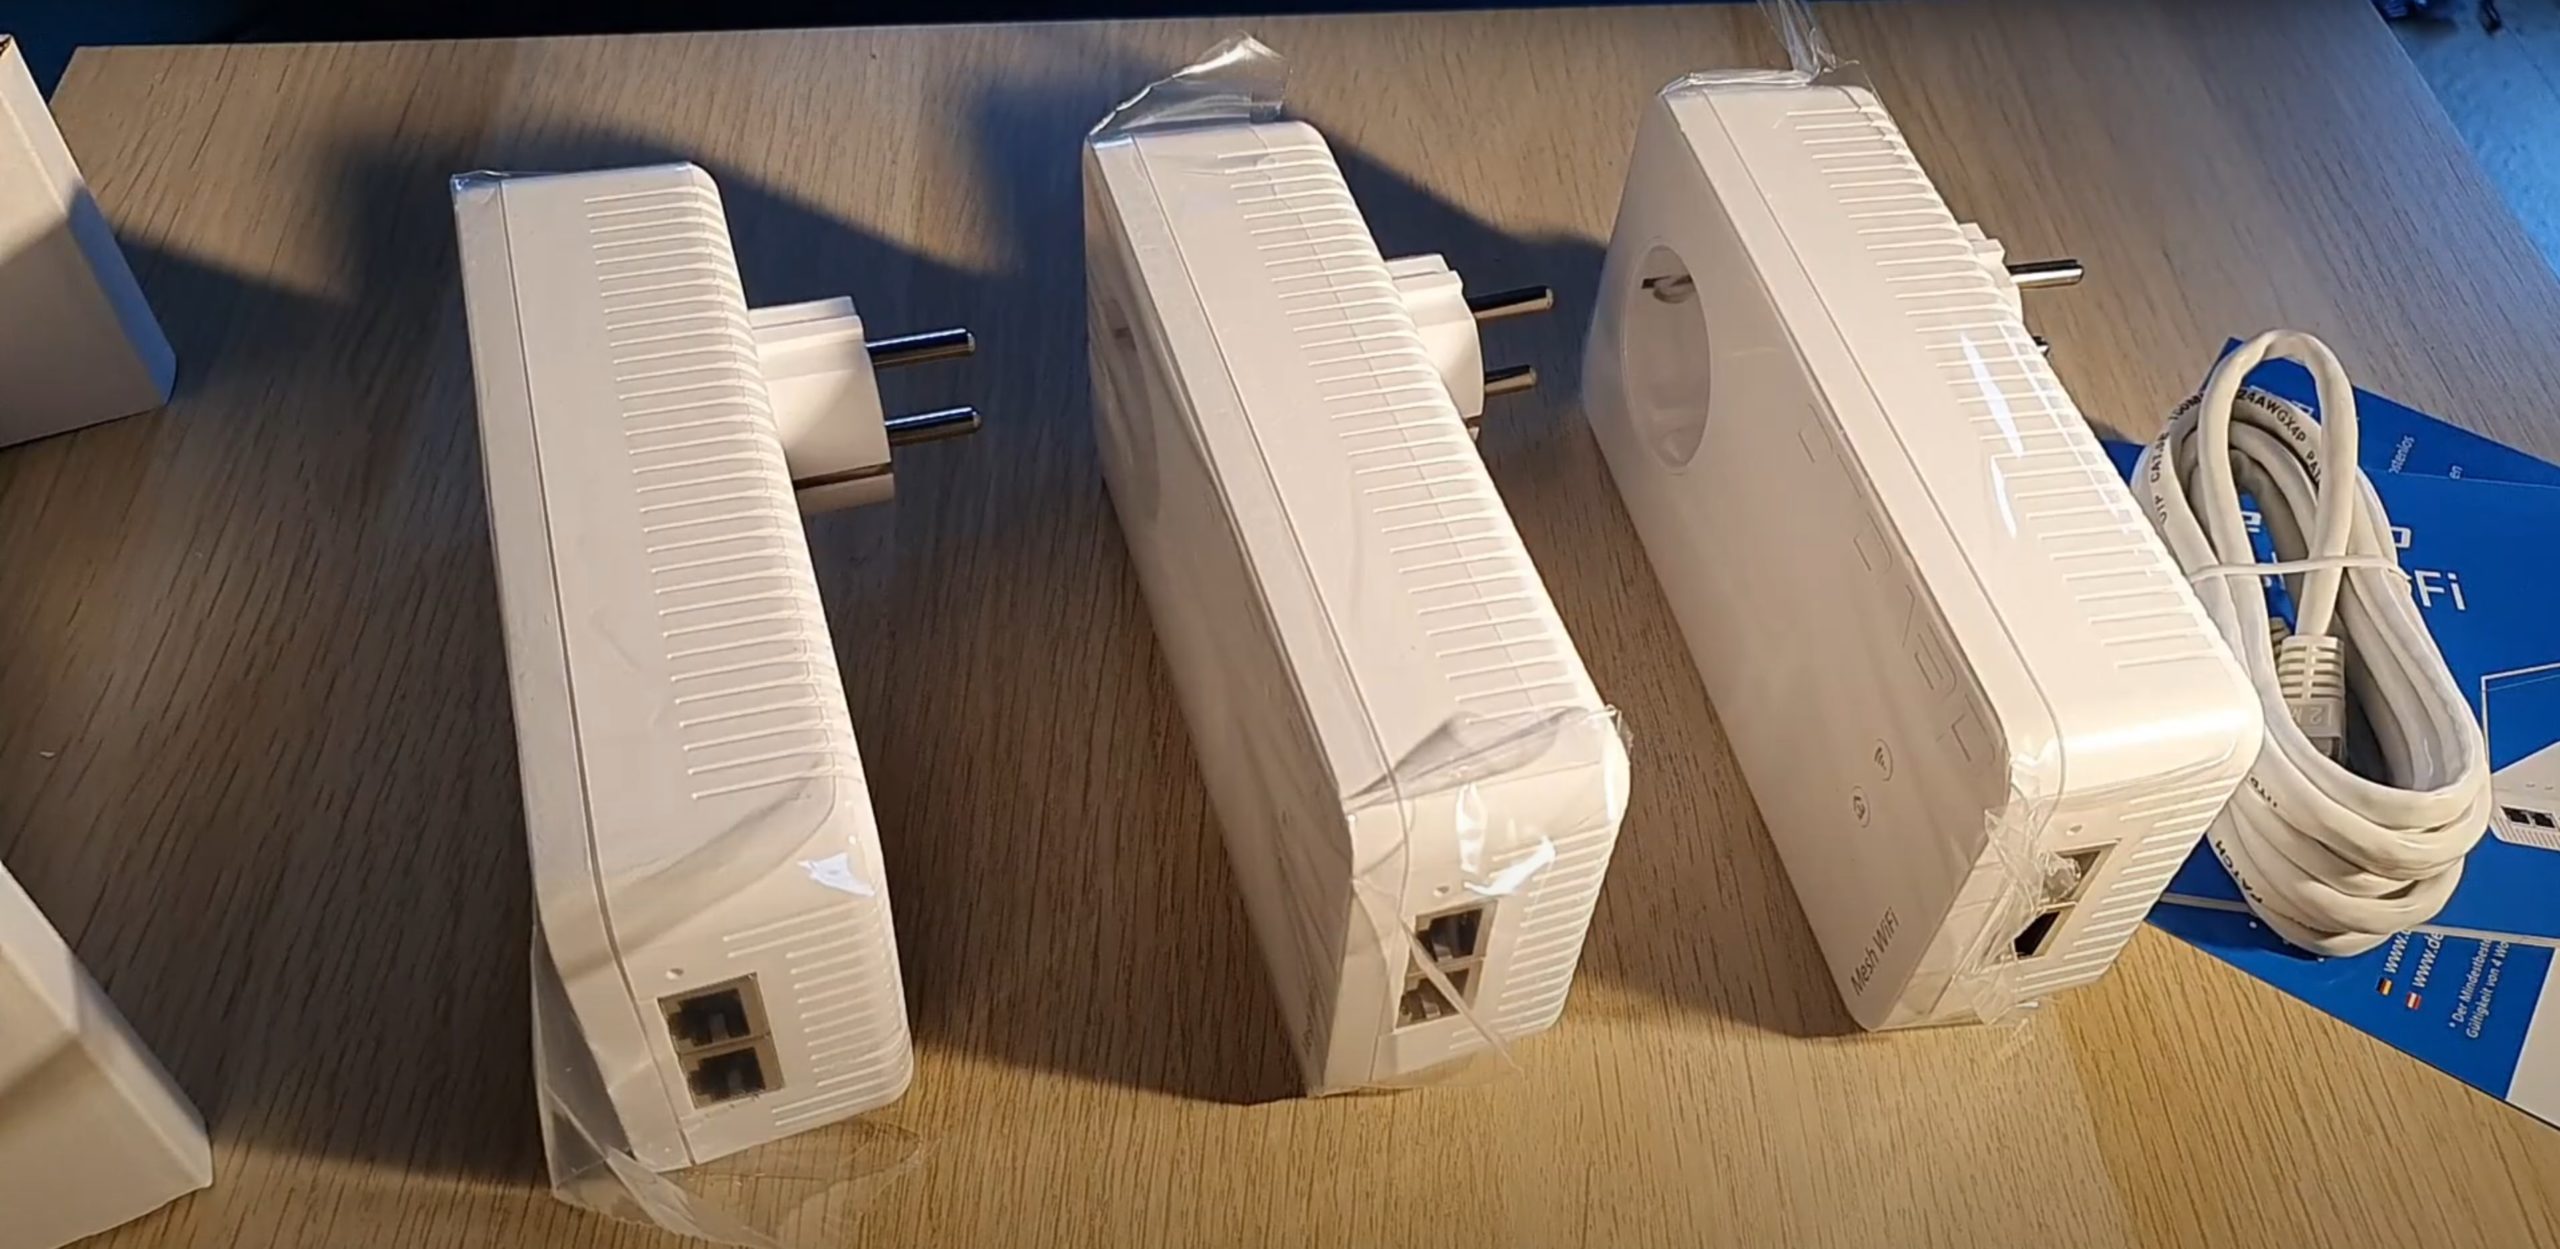 devolo Mesh WiFi 2 • Unboxing, installation, configuration and